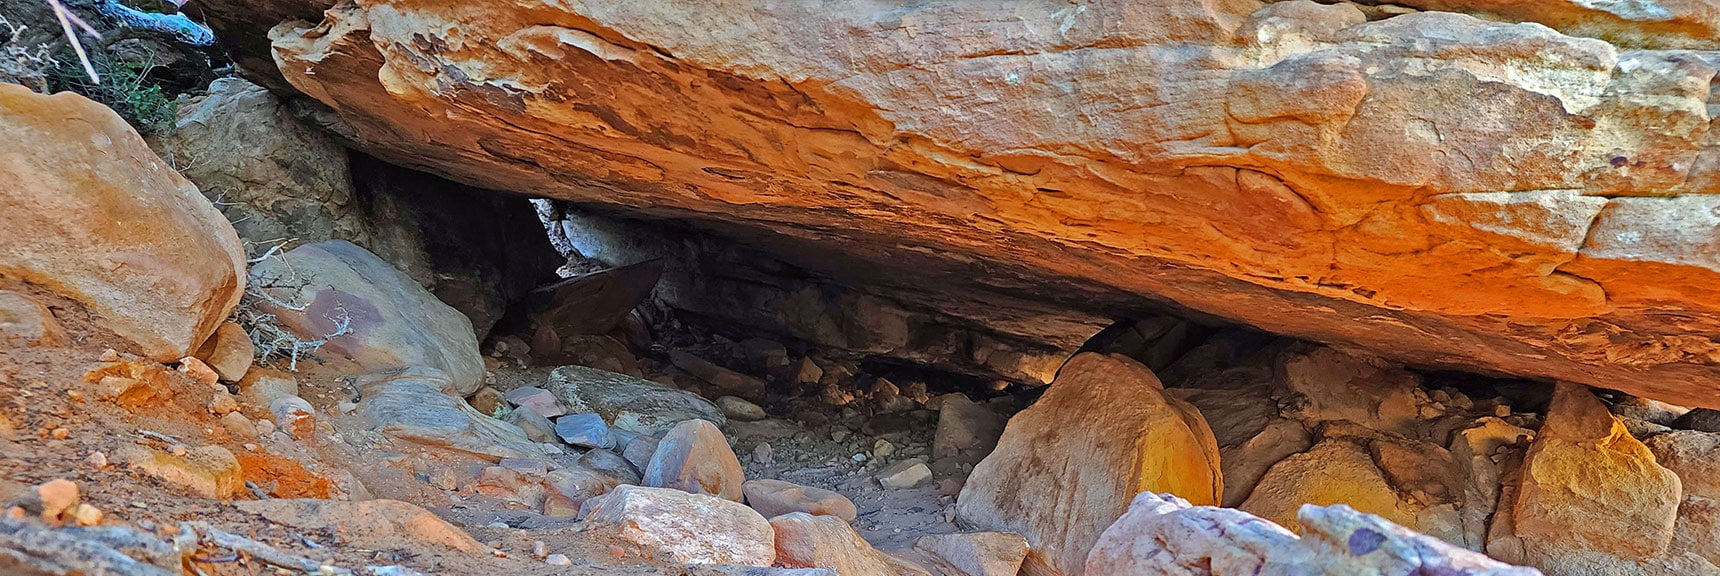 Possible Native American Dwelling Shields from Heat and Cold | Willow Spring Loop, Petroglyph Canyon, Lost Creek Canyon | Red Rock Canyon National Conservation Area, Nevada